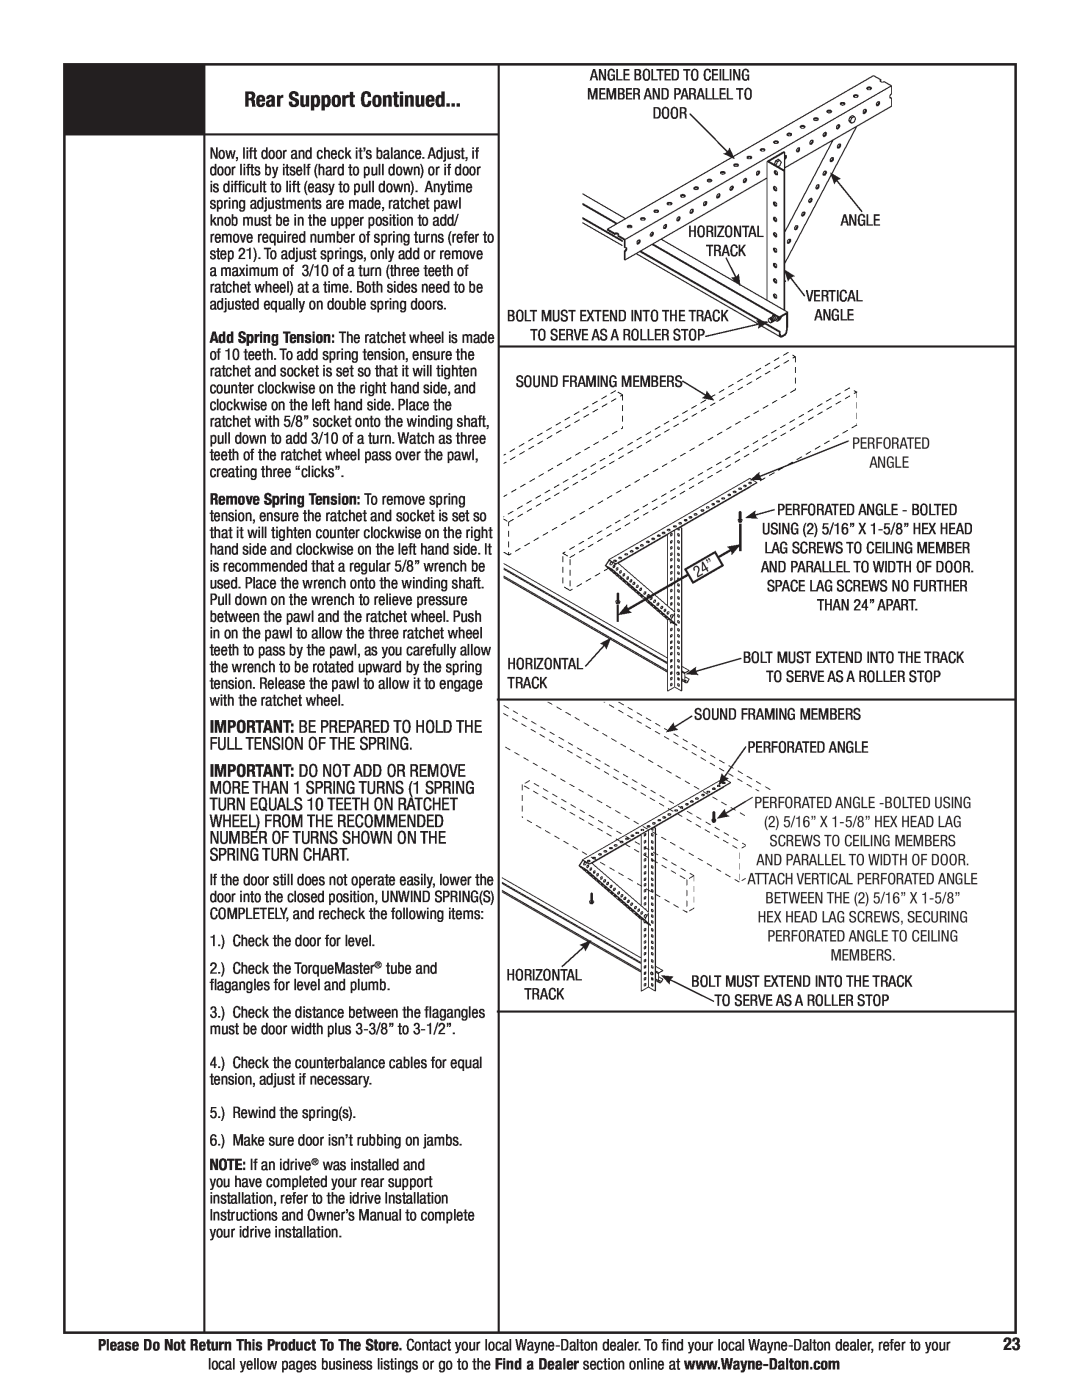 Wayne-Dalton 9700 installation instructions Rear Support Continued, Full Tension Of The Spring, Spring Turn Chart 